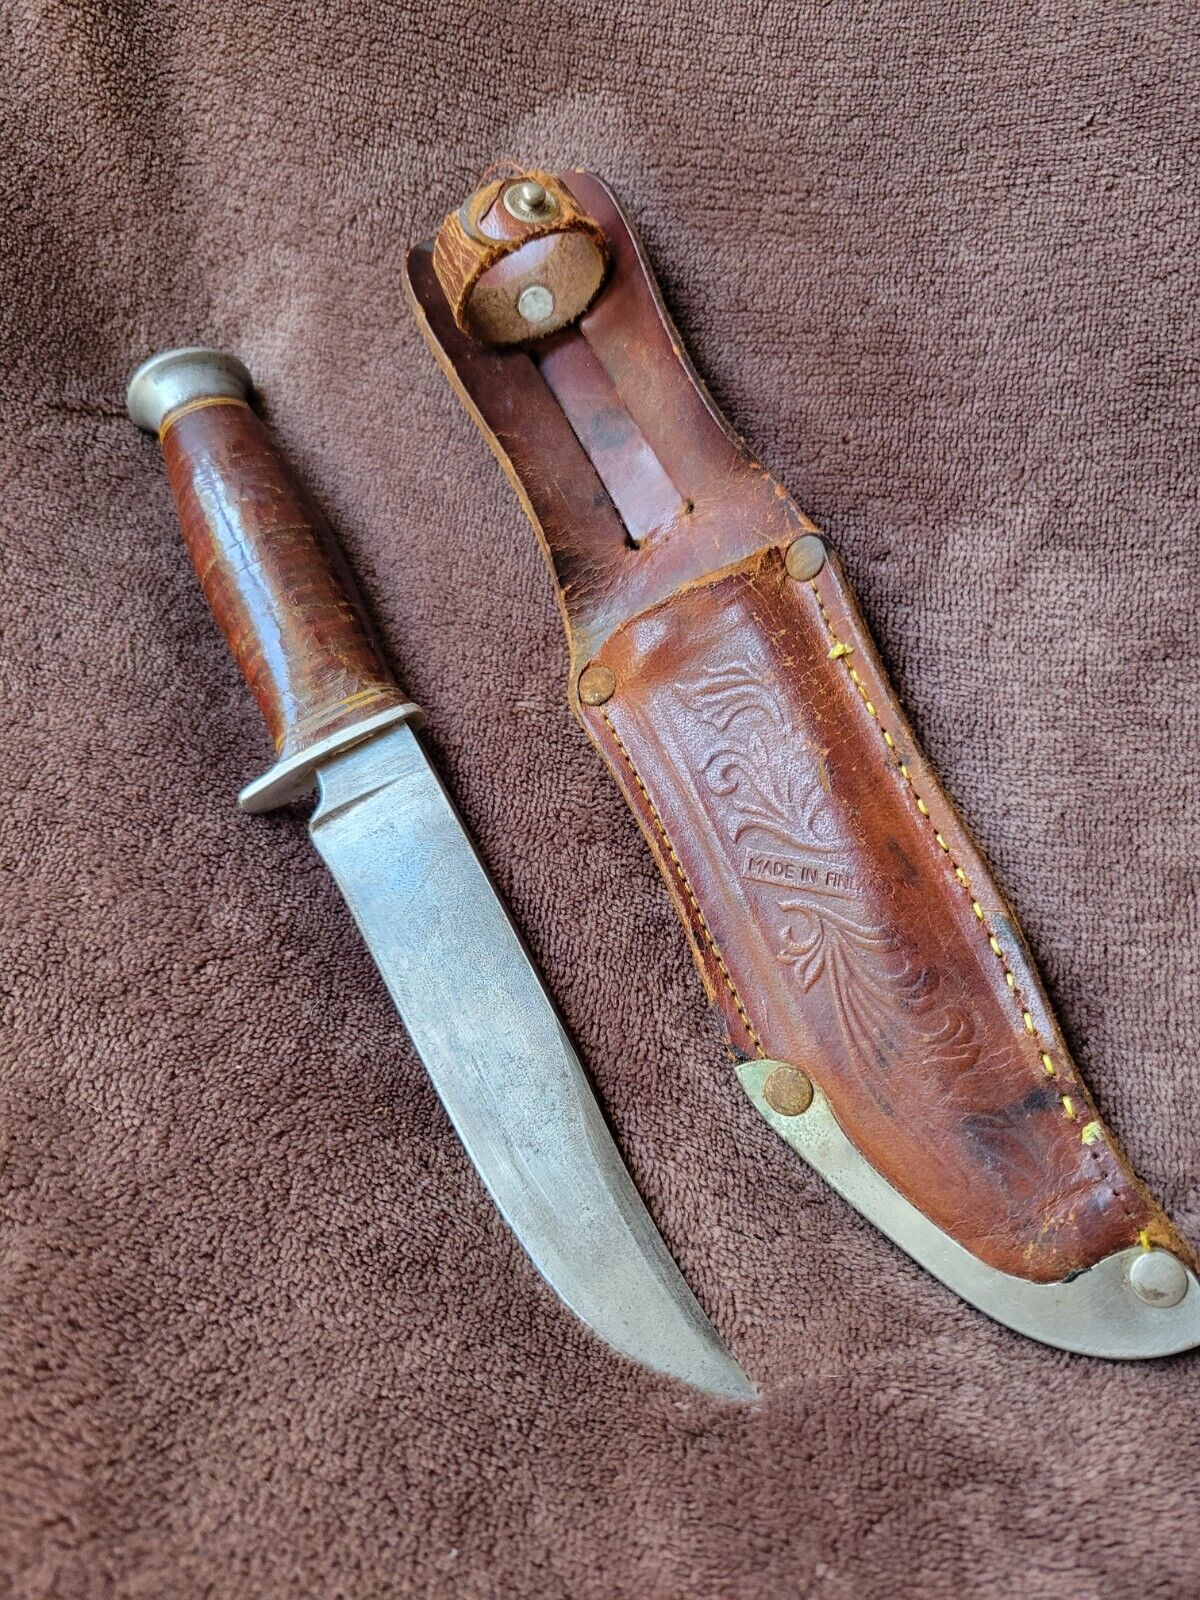 Vintage Finnish Leather Handle Fixed Blade Knife with Sheath - Made in Finland